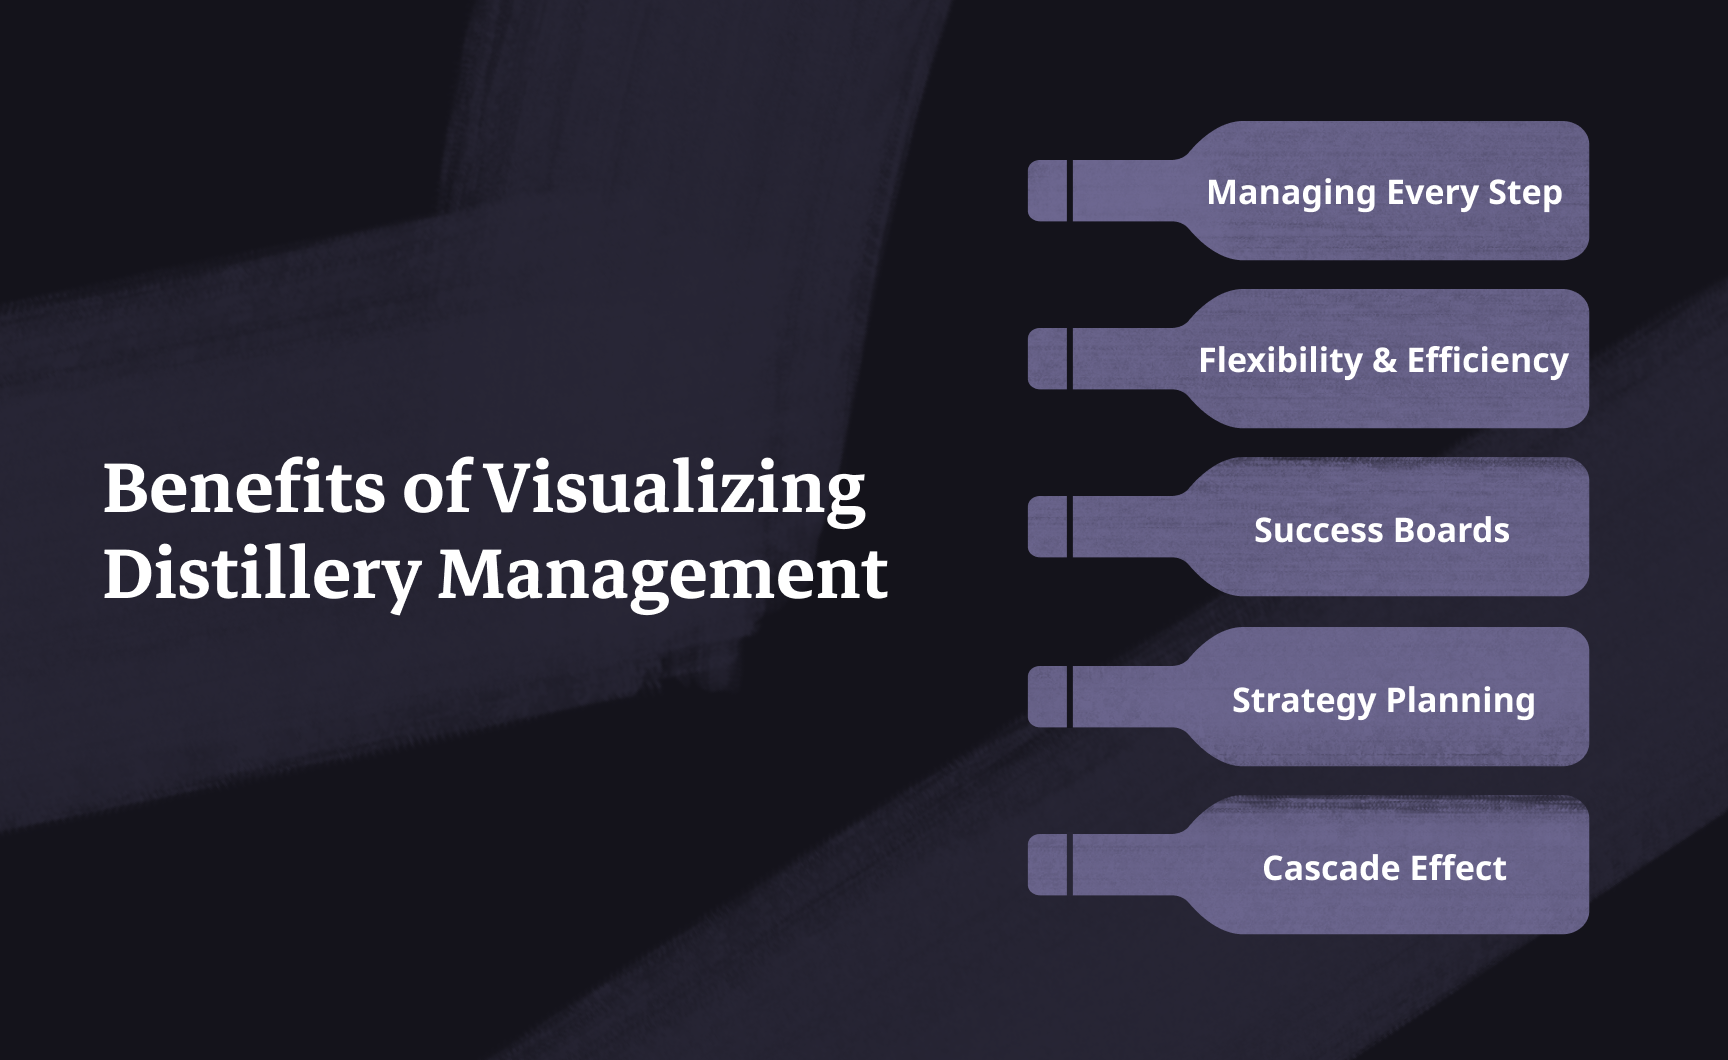 Four of the Benefits of Visualizing Distillery Management with Obeya are: Managing Every Step, Flexibility and Efficiency, Success Boards and Strategy Planning, & Cascade Effect.